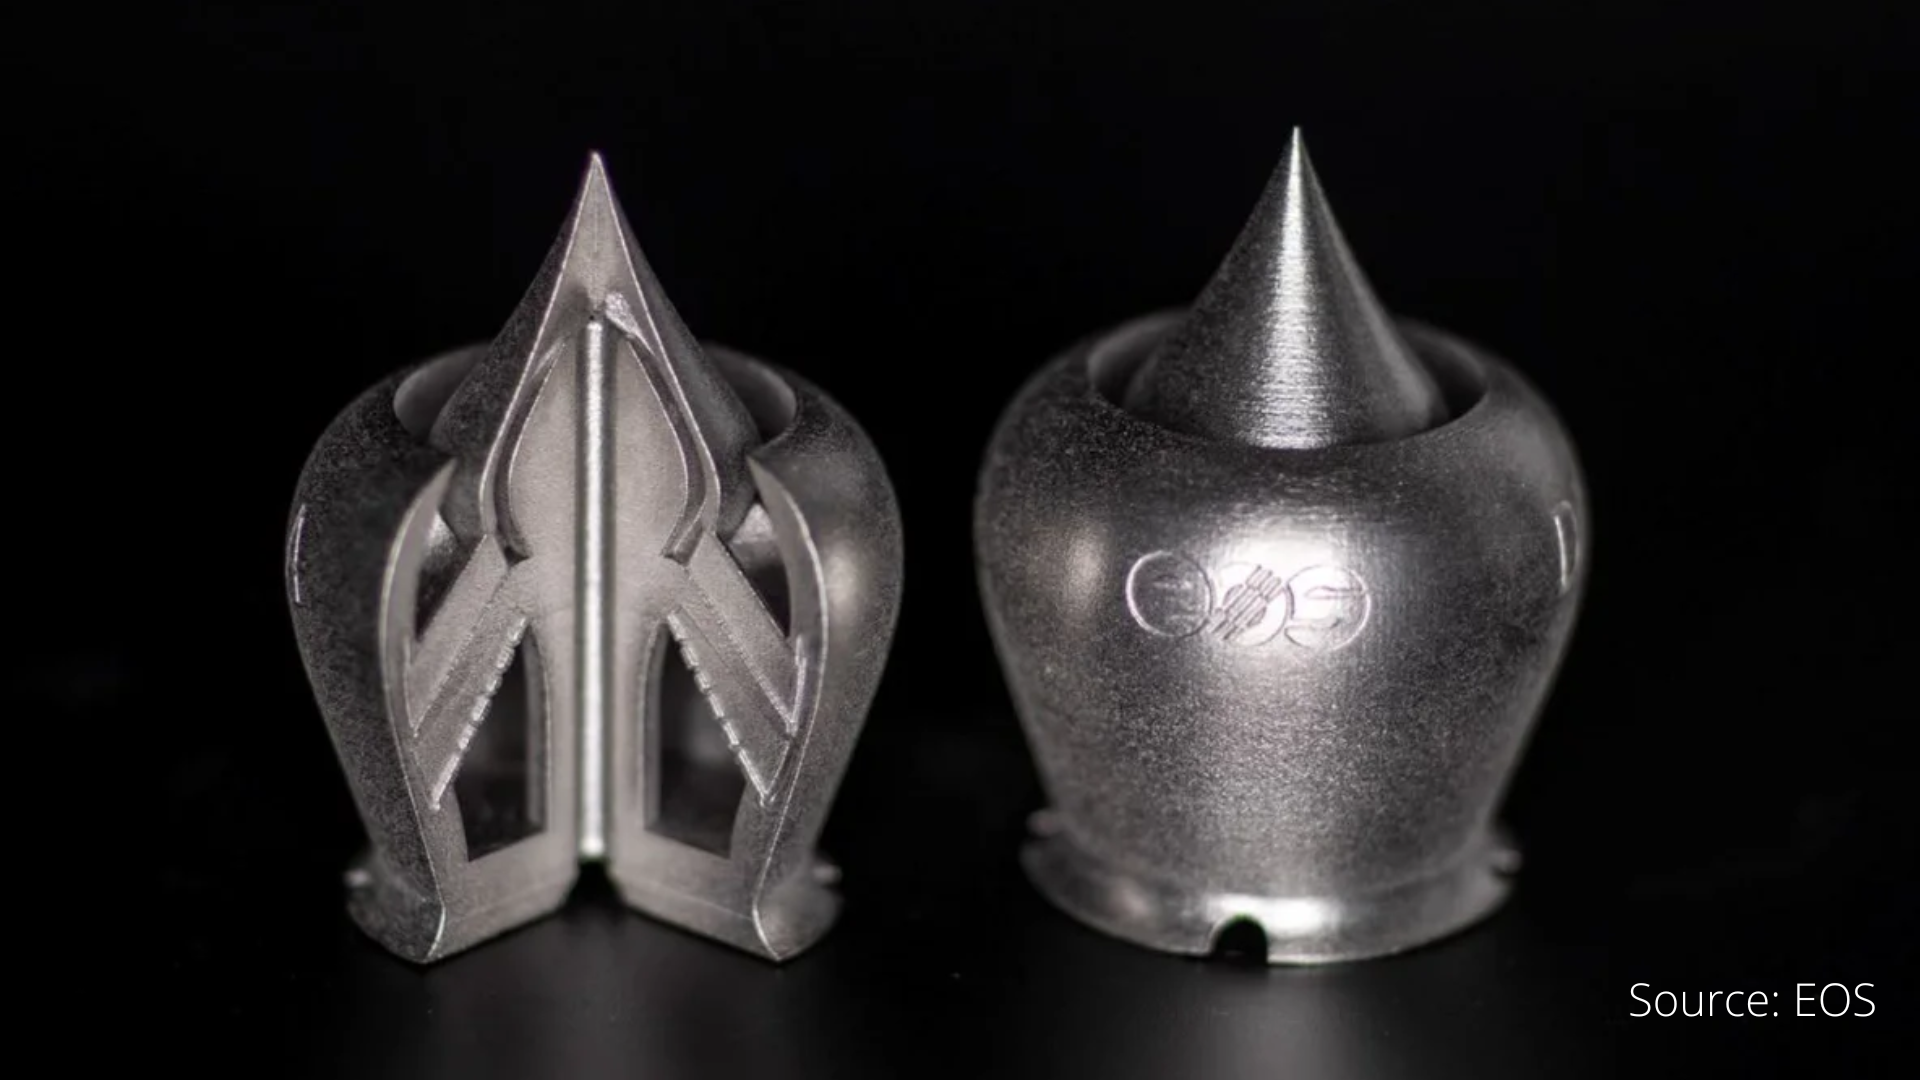 EOS announced four new metal AM materials for additive manufacturing on the EOS M 290; two stainless steels, one tool steel and one nickel alloy.